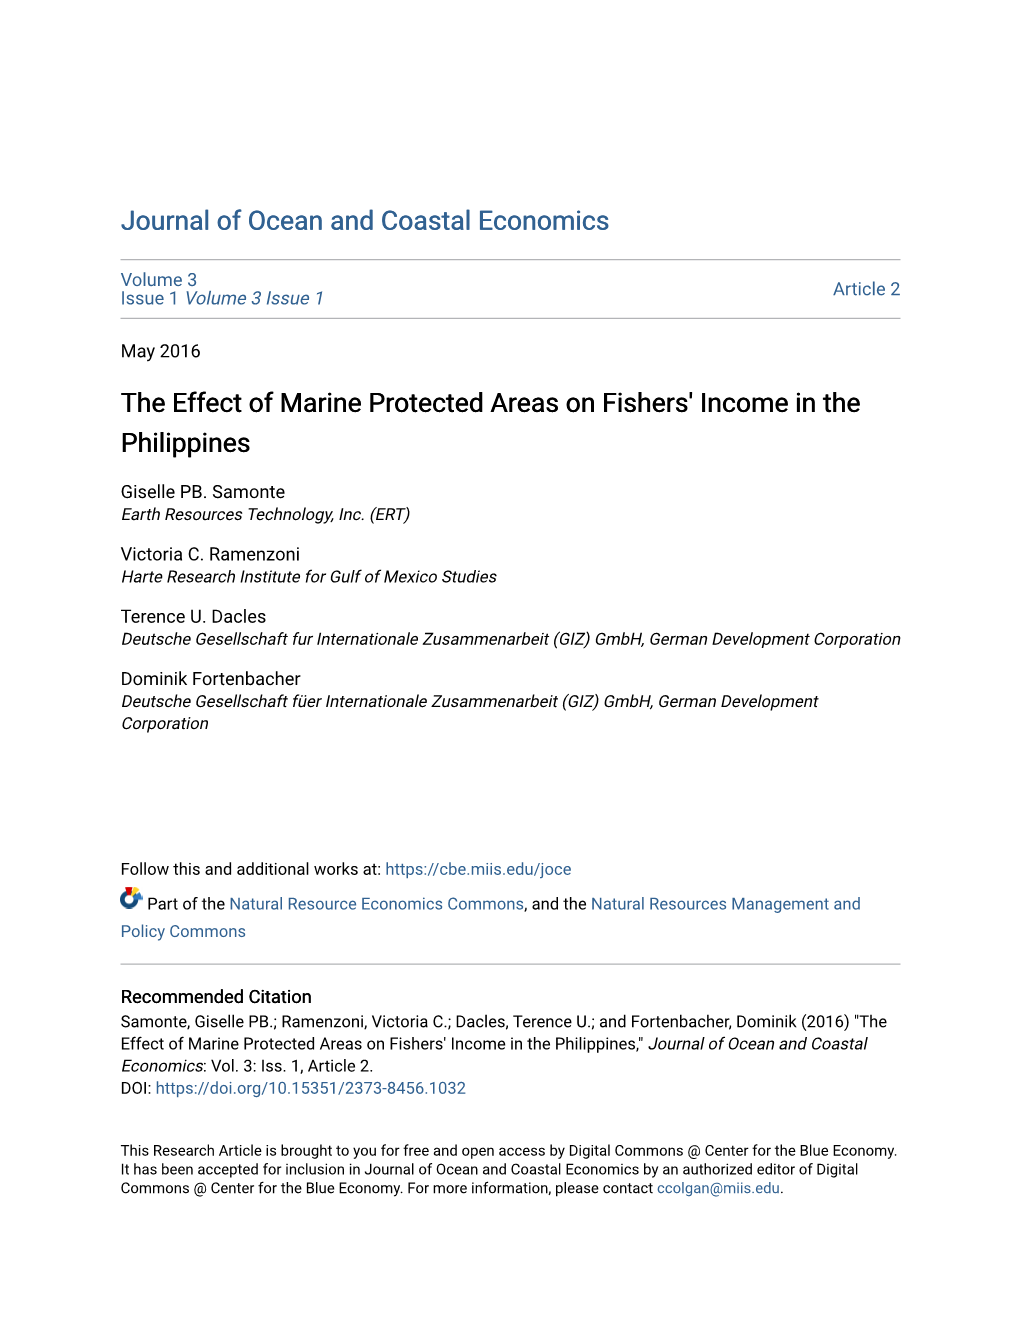 The Effect of Marine Protected Areas on Fishers' Income in the Philippines